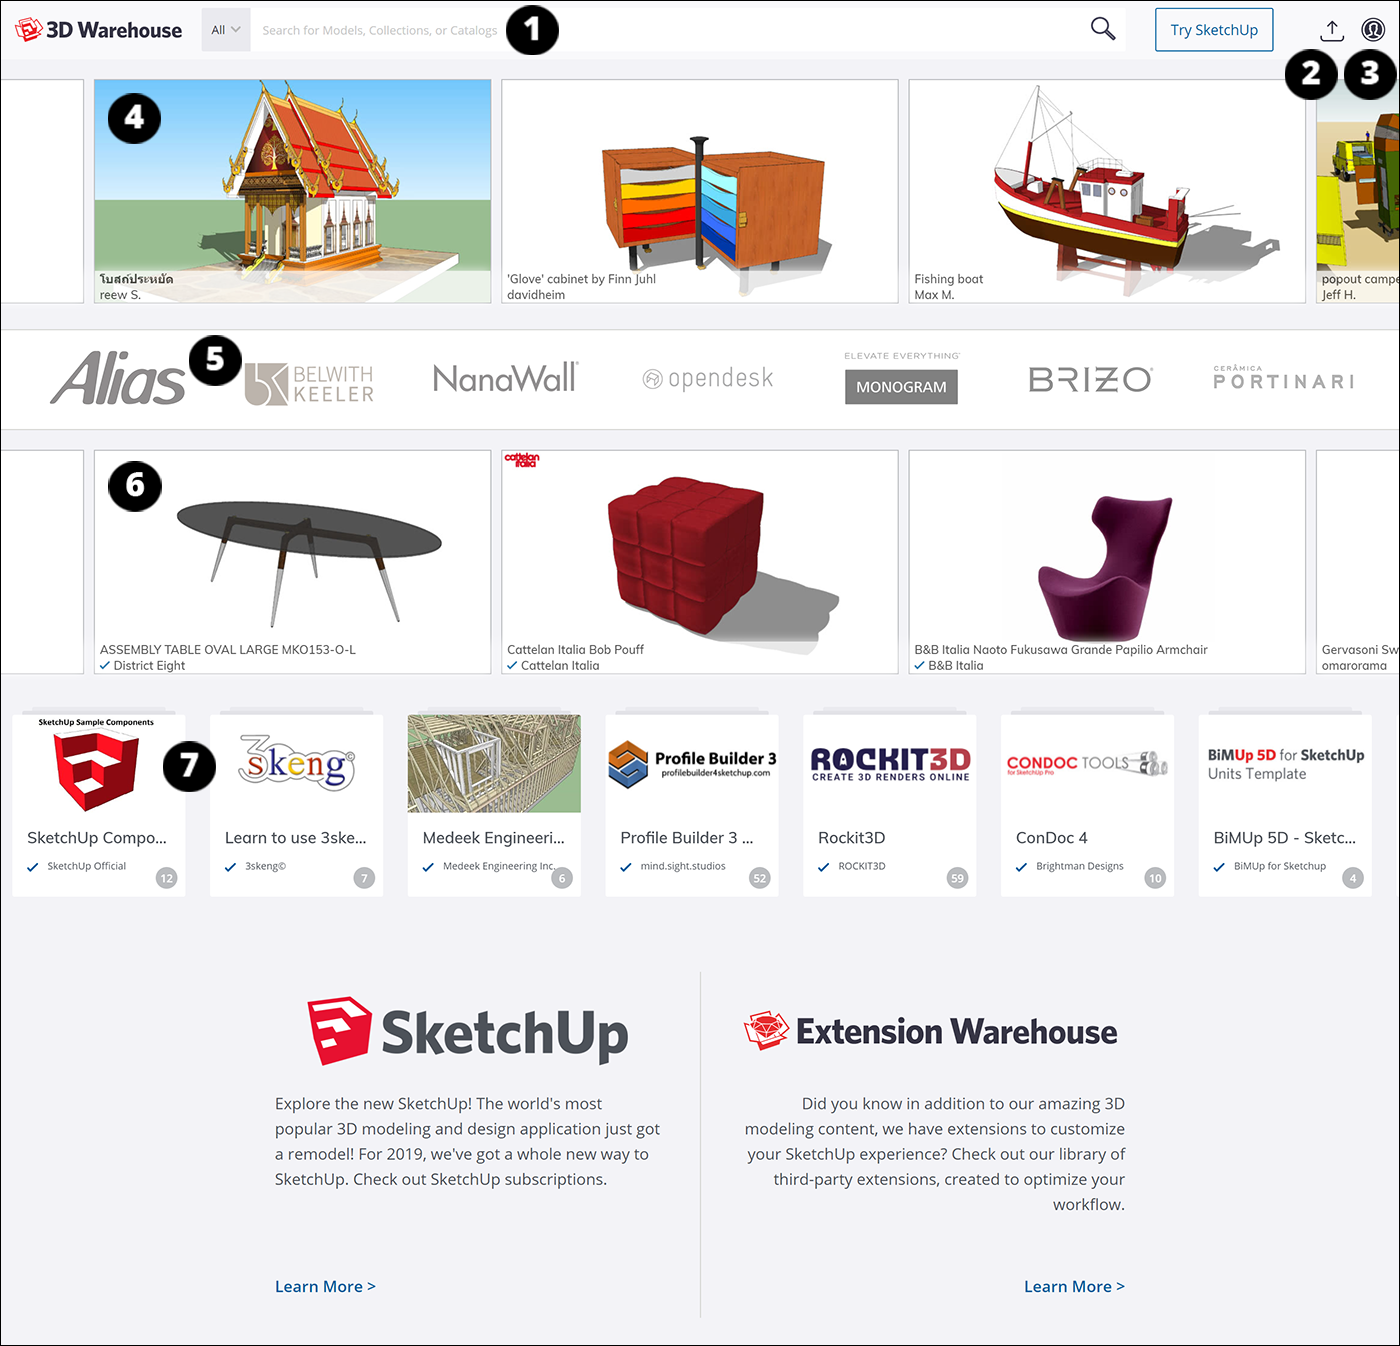 From the main page of 3D Warehouse, you can search for SketchUp models and materials based on keywords, brands, and more